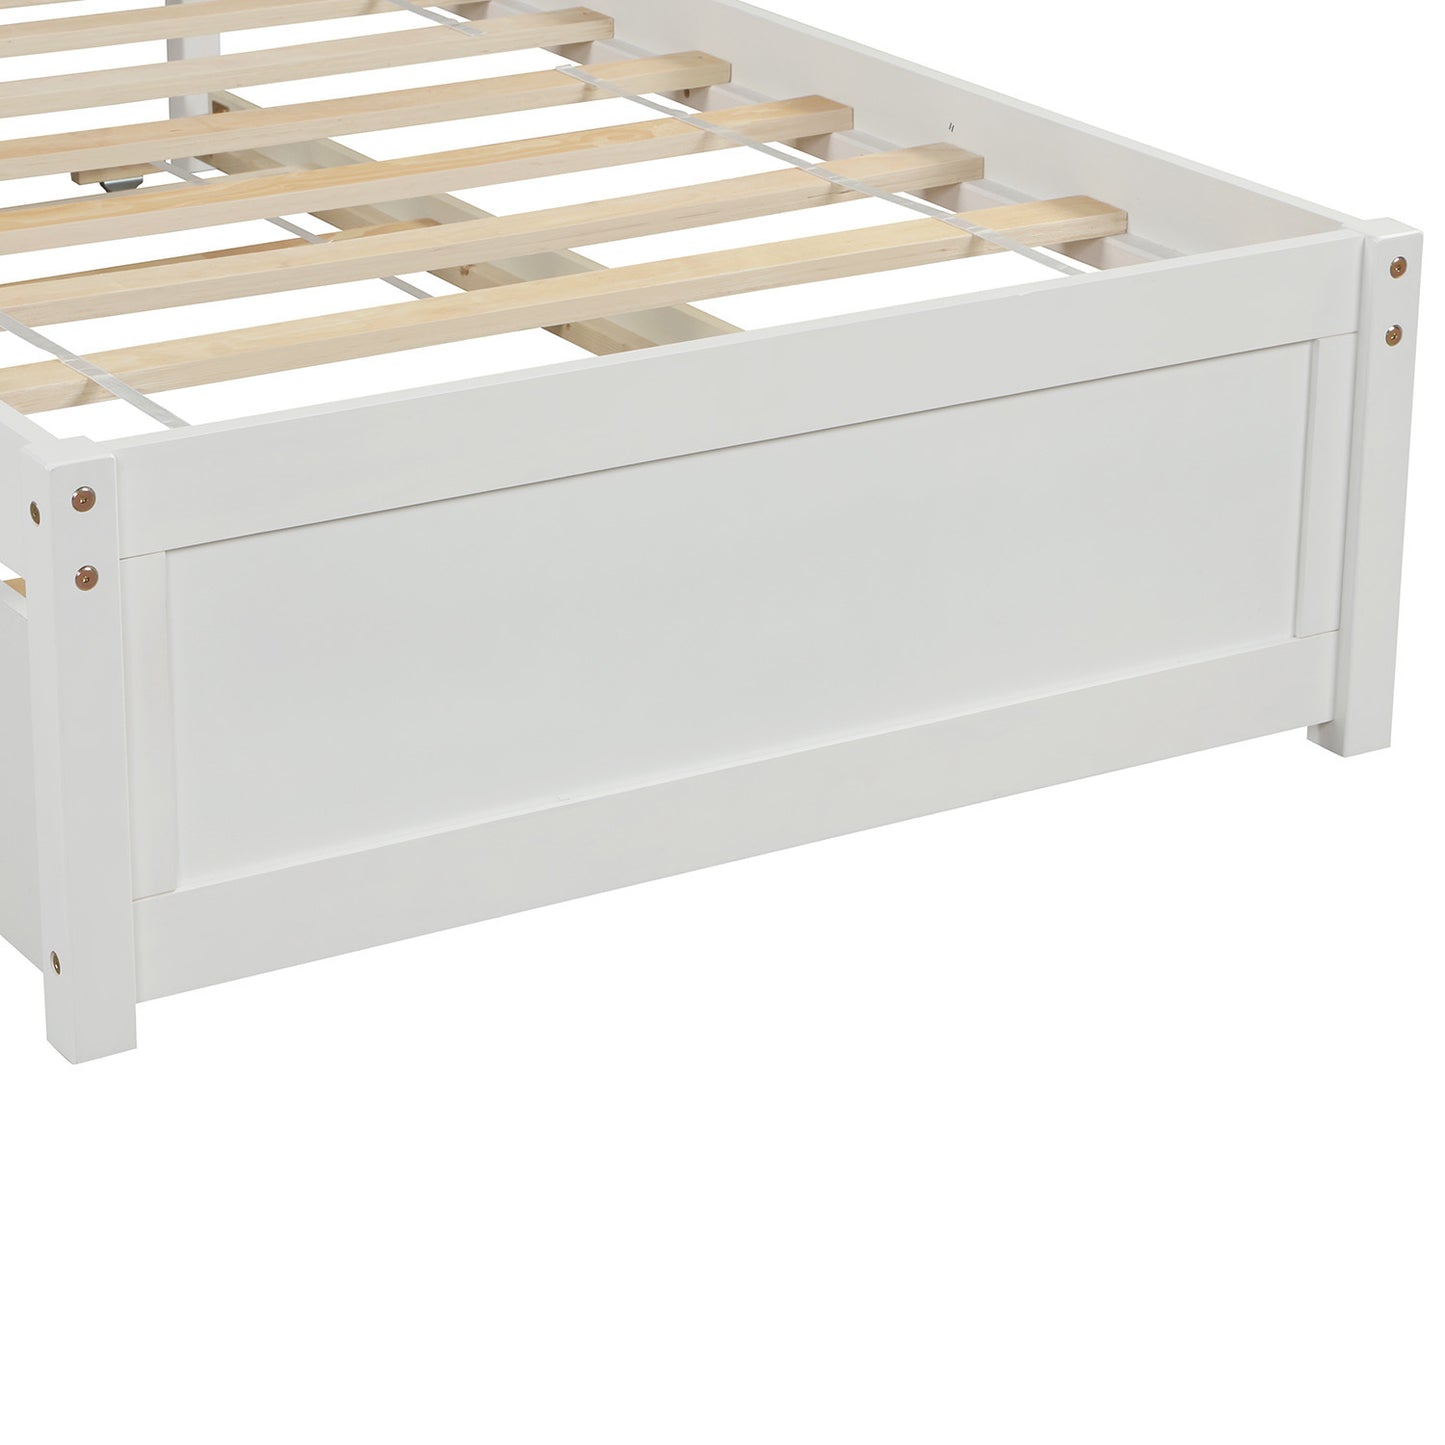 Twin size Platform Bed Wood Bed Frame with Trundle, White